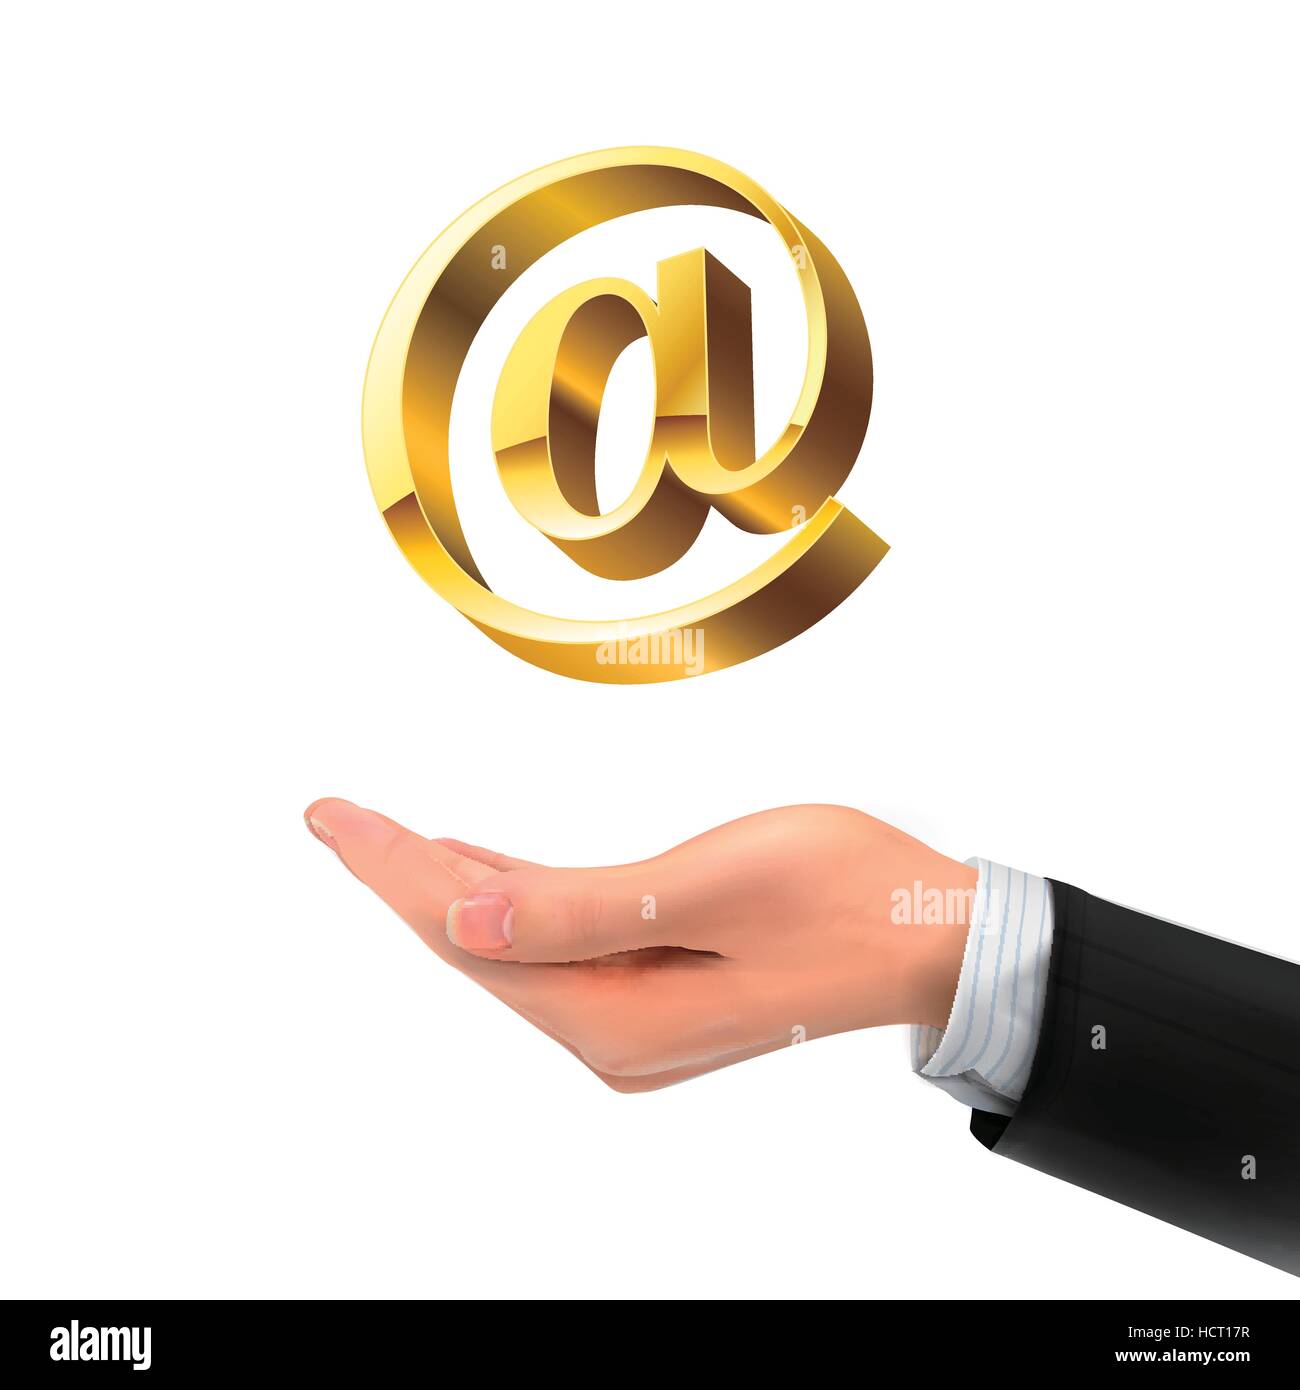 Realistic Post Mailbox Letter Hand Composition With Images Of Human Hand  Envelopes And Classic Mail Box Vector Illustration Royalty Free SVG,  Cliparts, Vectors, and Stock Illustration. Image 127459125.